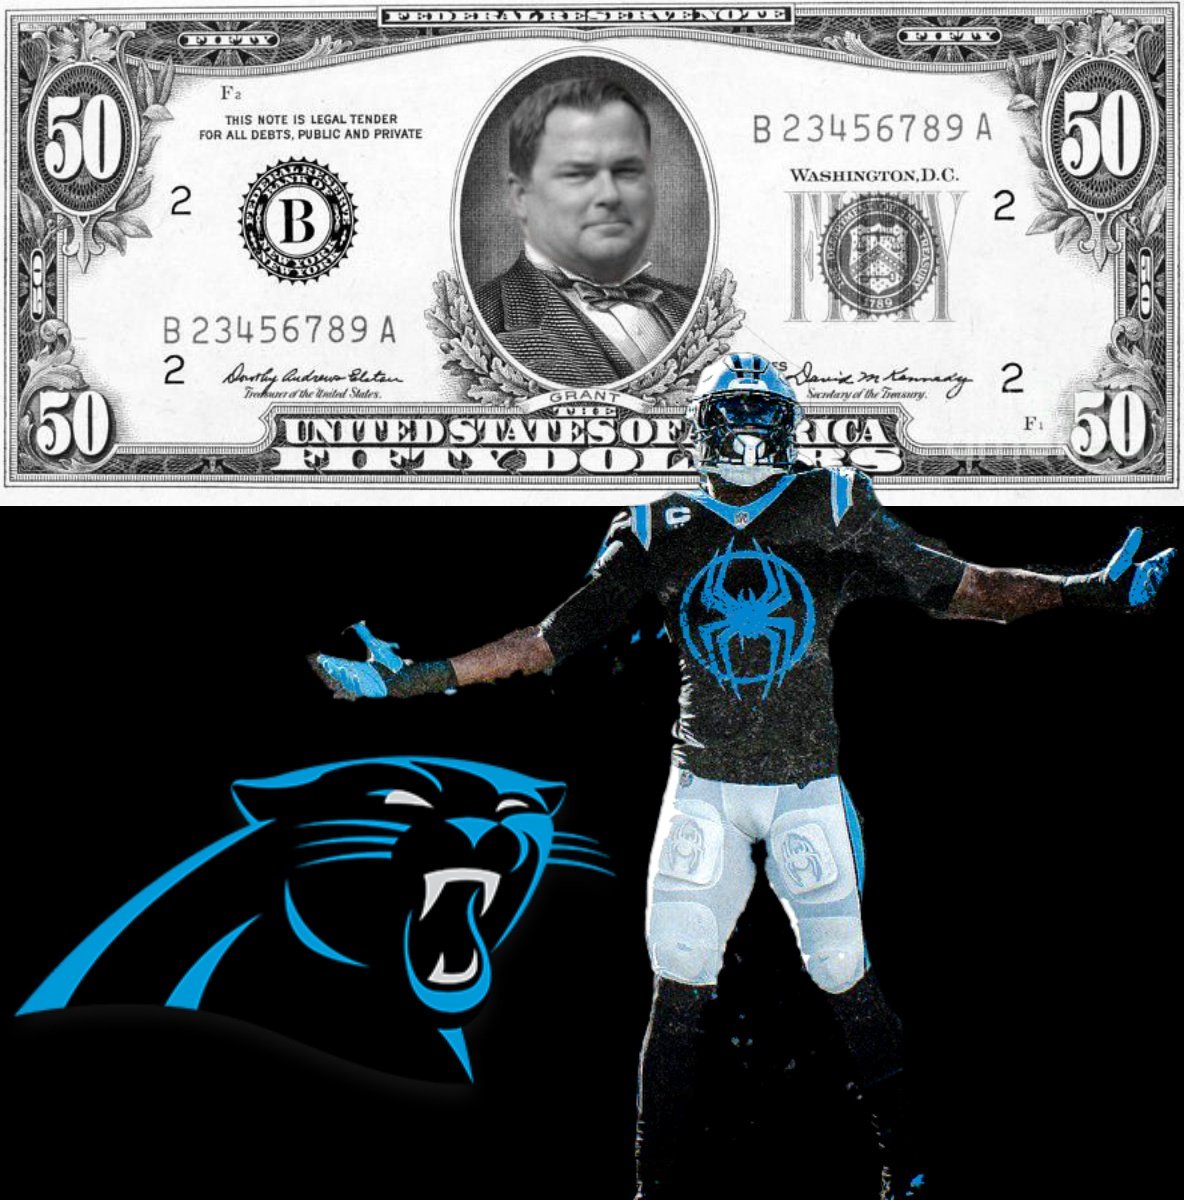 I thought we was keeping things a buck??? 💯 
What changed 😭

TOMORROW IS #GAMEDAY 😳

Top notch professionals can't find a way to get a deal done?

Make it make sense...

Prime Time 
#KeepPounding 
#TheKingOfSportsbooks